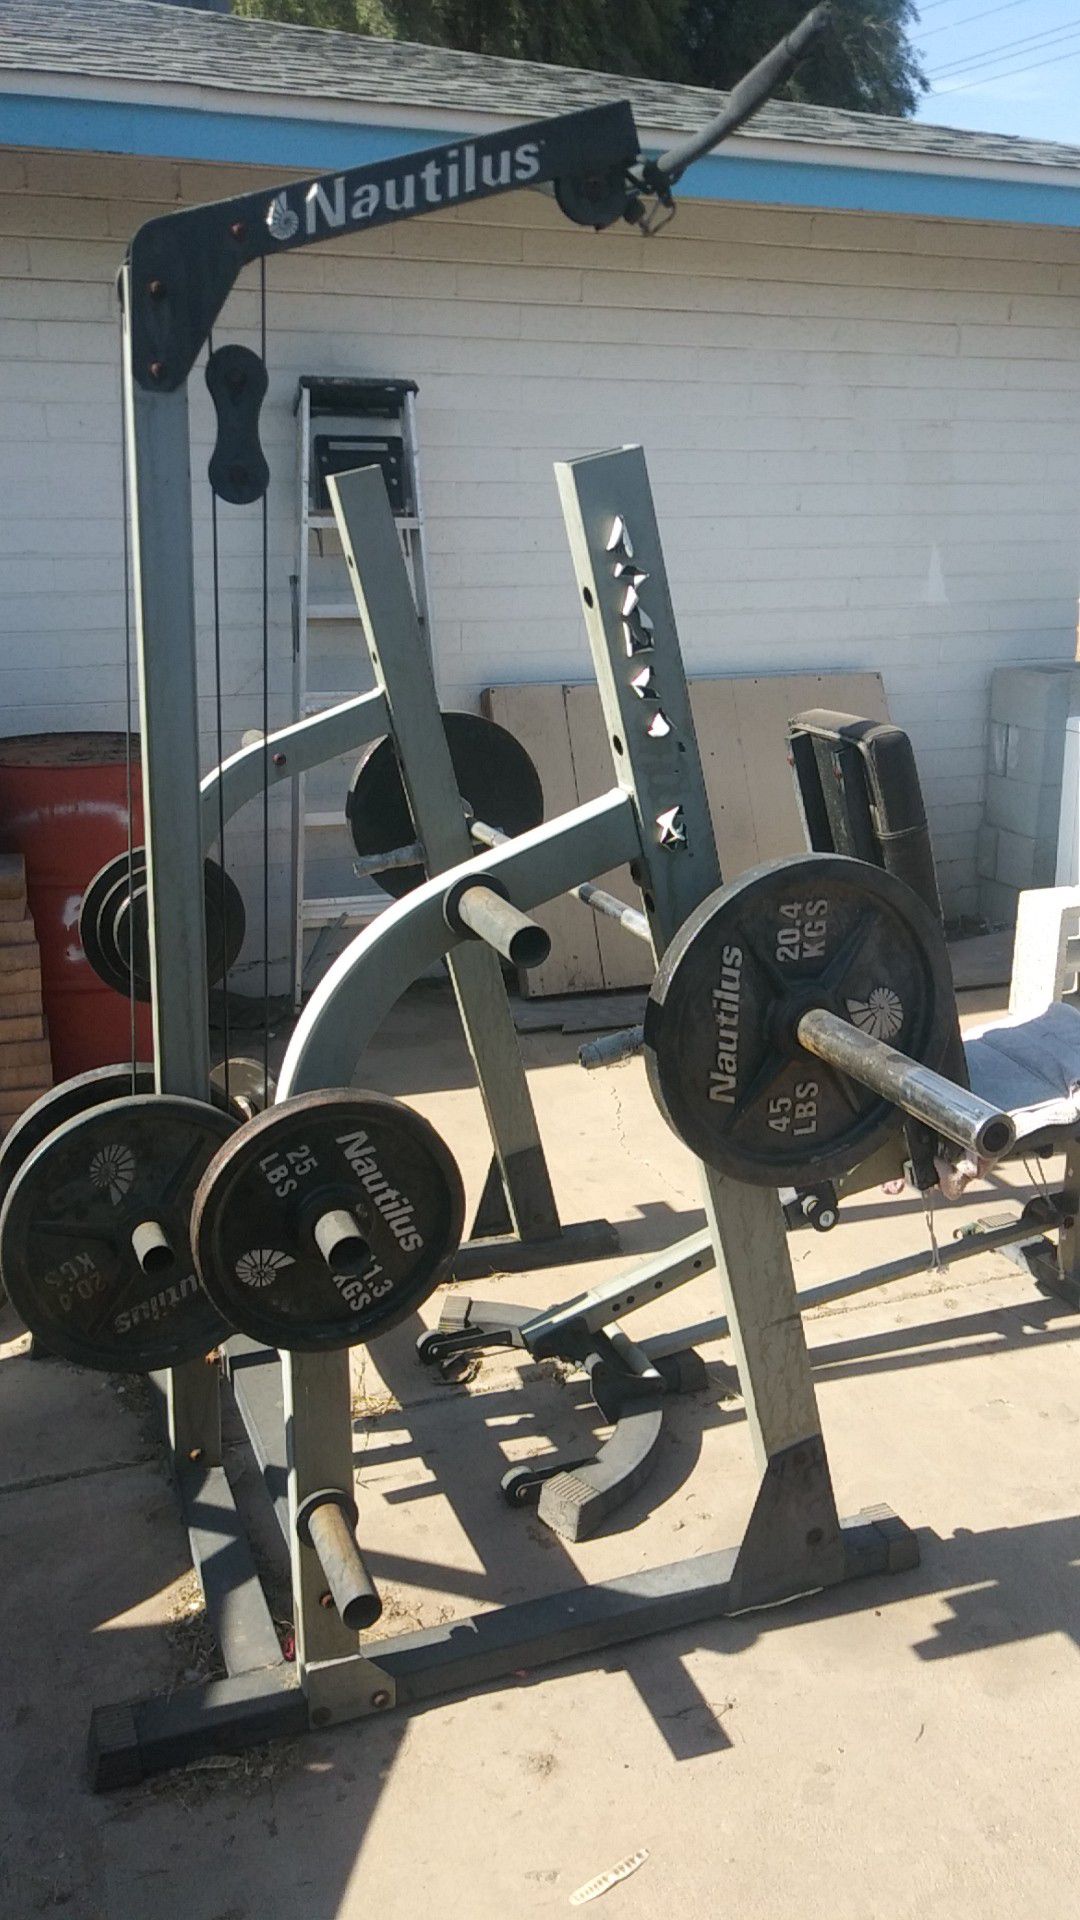 Weight set with curl bar bench press and rack with 250+ pounds of weight plates